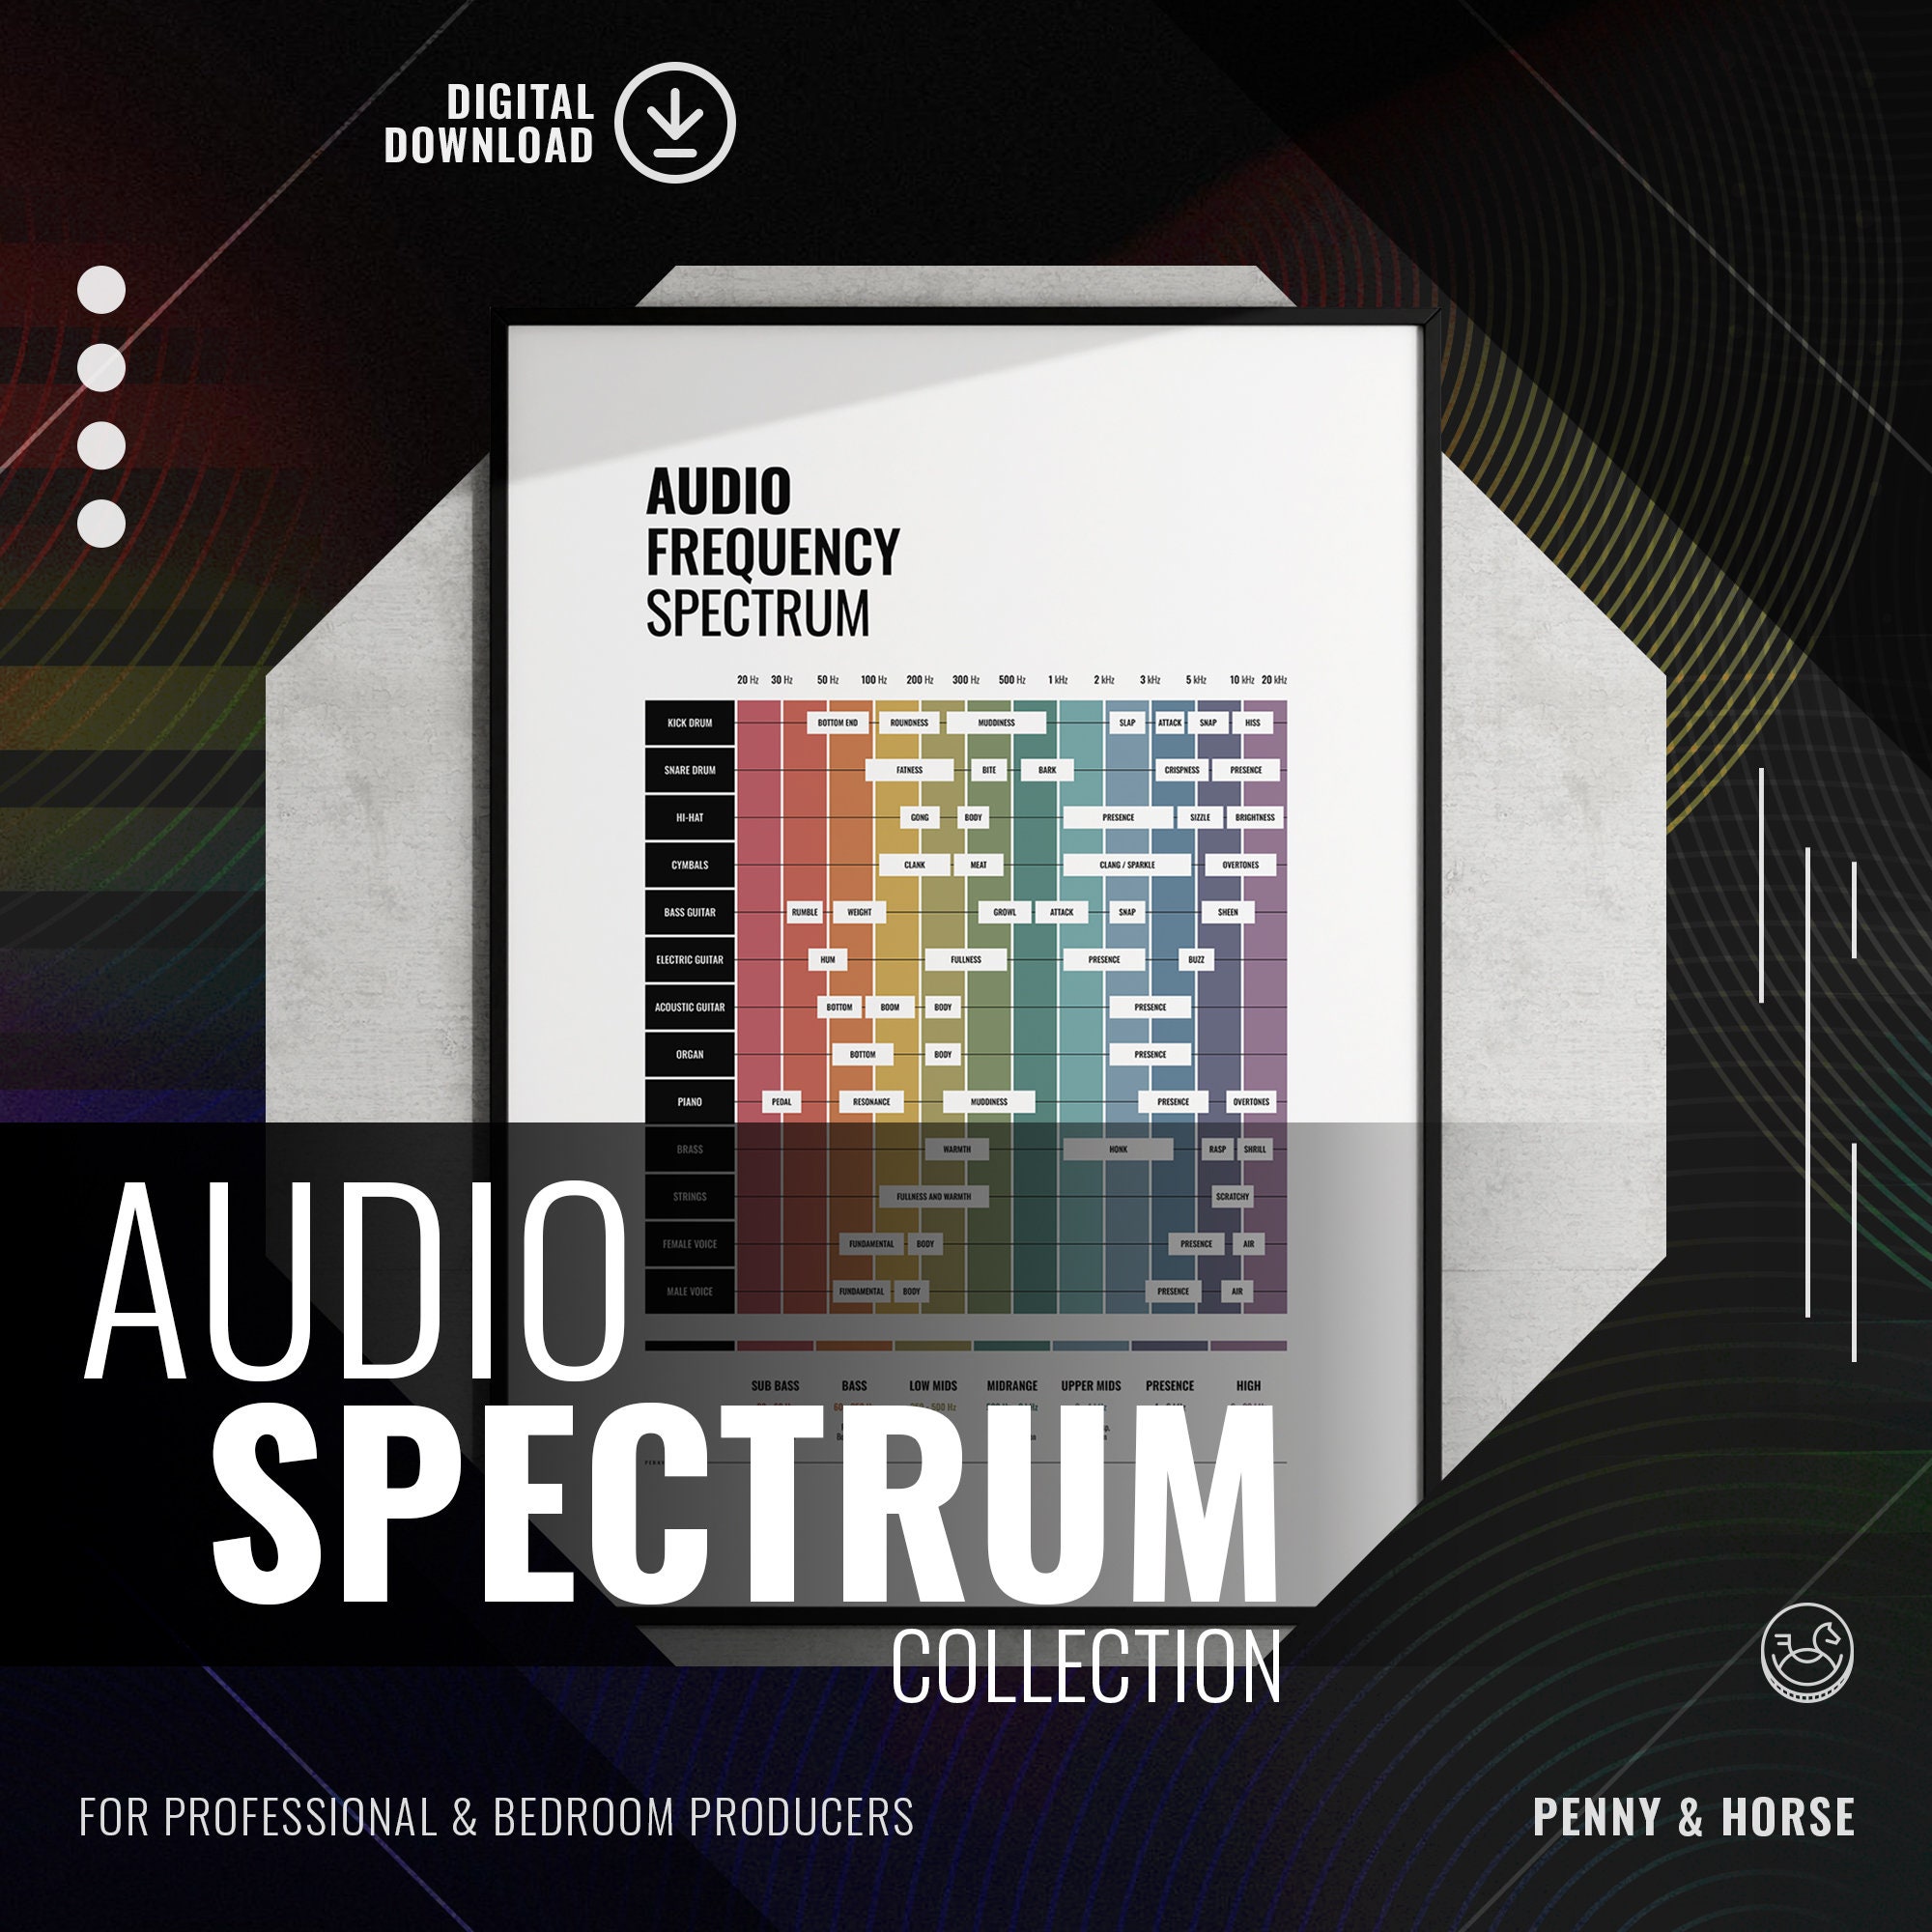 Audio Frequency Spectrum Cheat Sheet, Music Mixing Reference, EQ